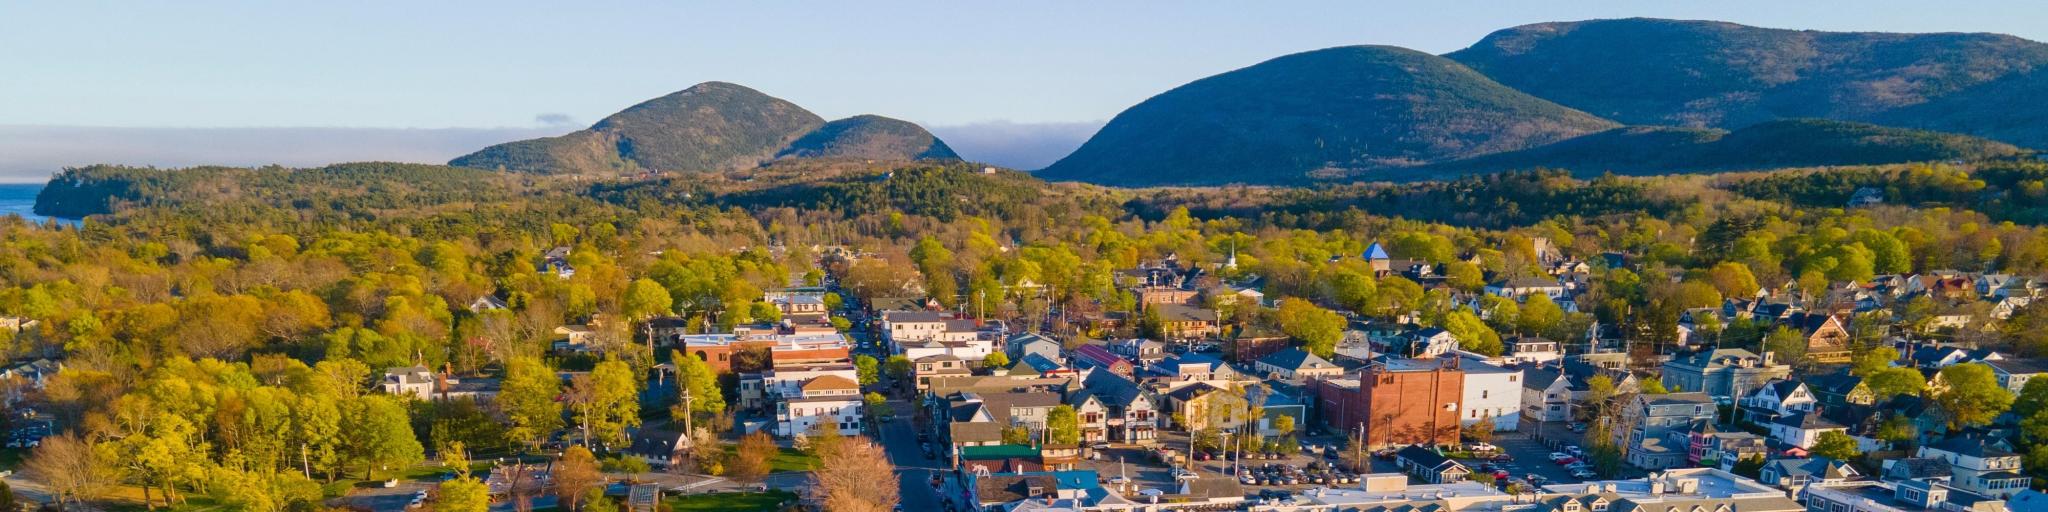 Bar Harbor historic town center aerial view at sunset